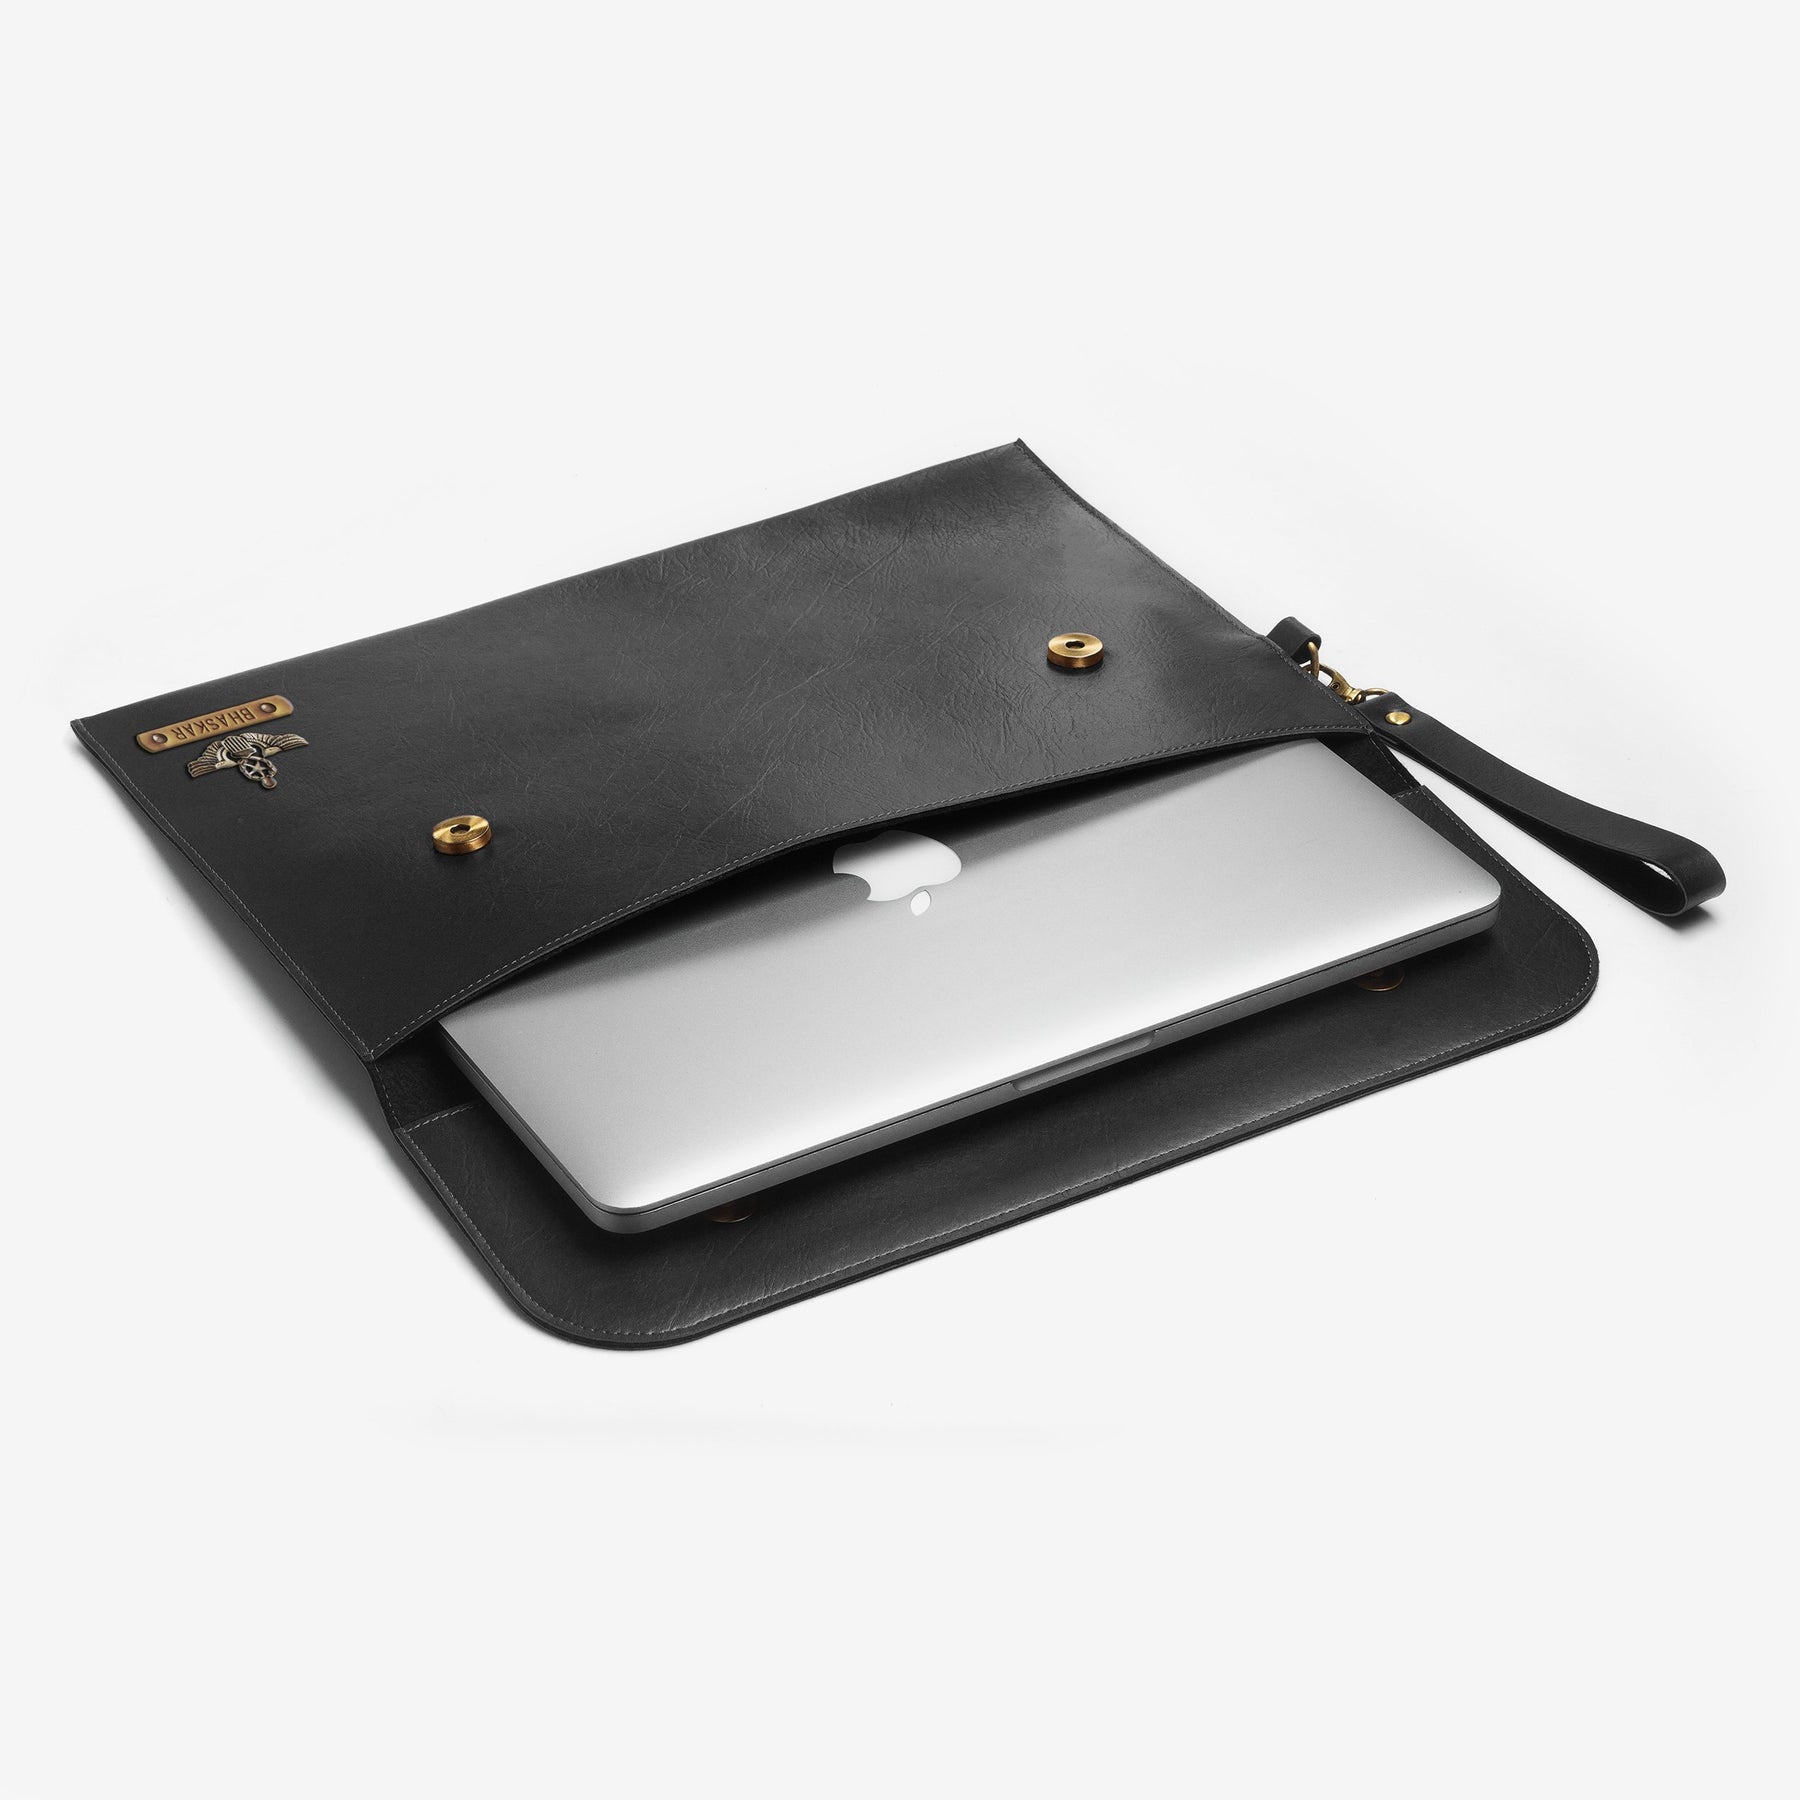 The Messy Corner Laptop Sleeve Personalized Leather Laptop/Macbook Sleeve - Black - 13 inches